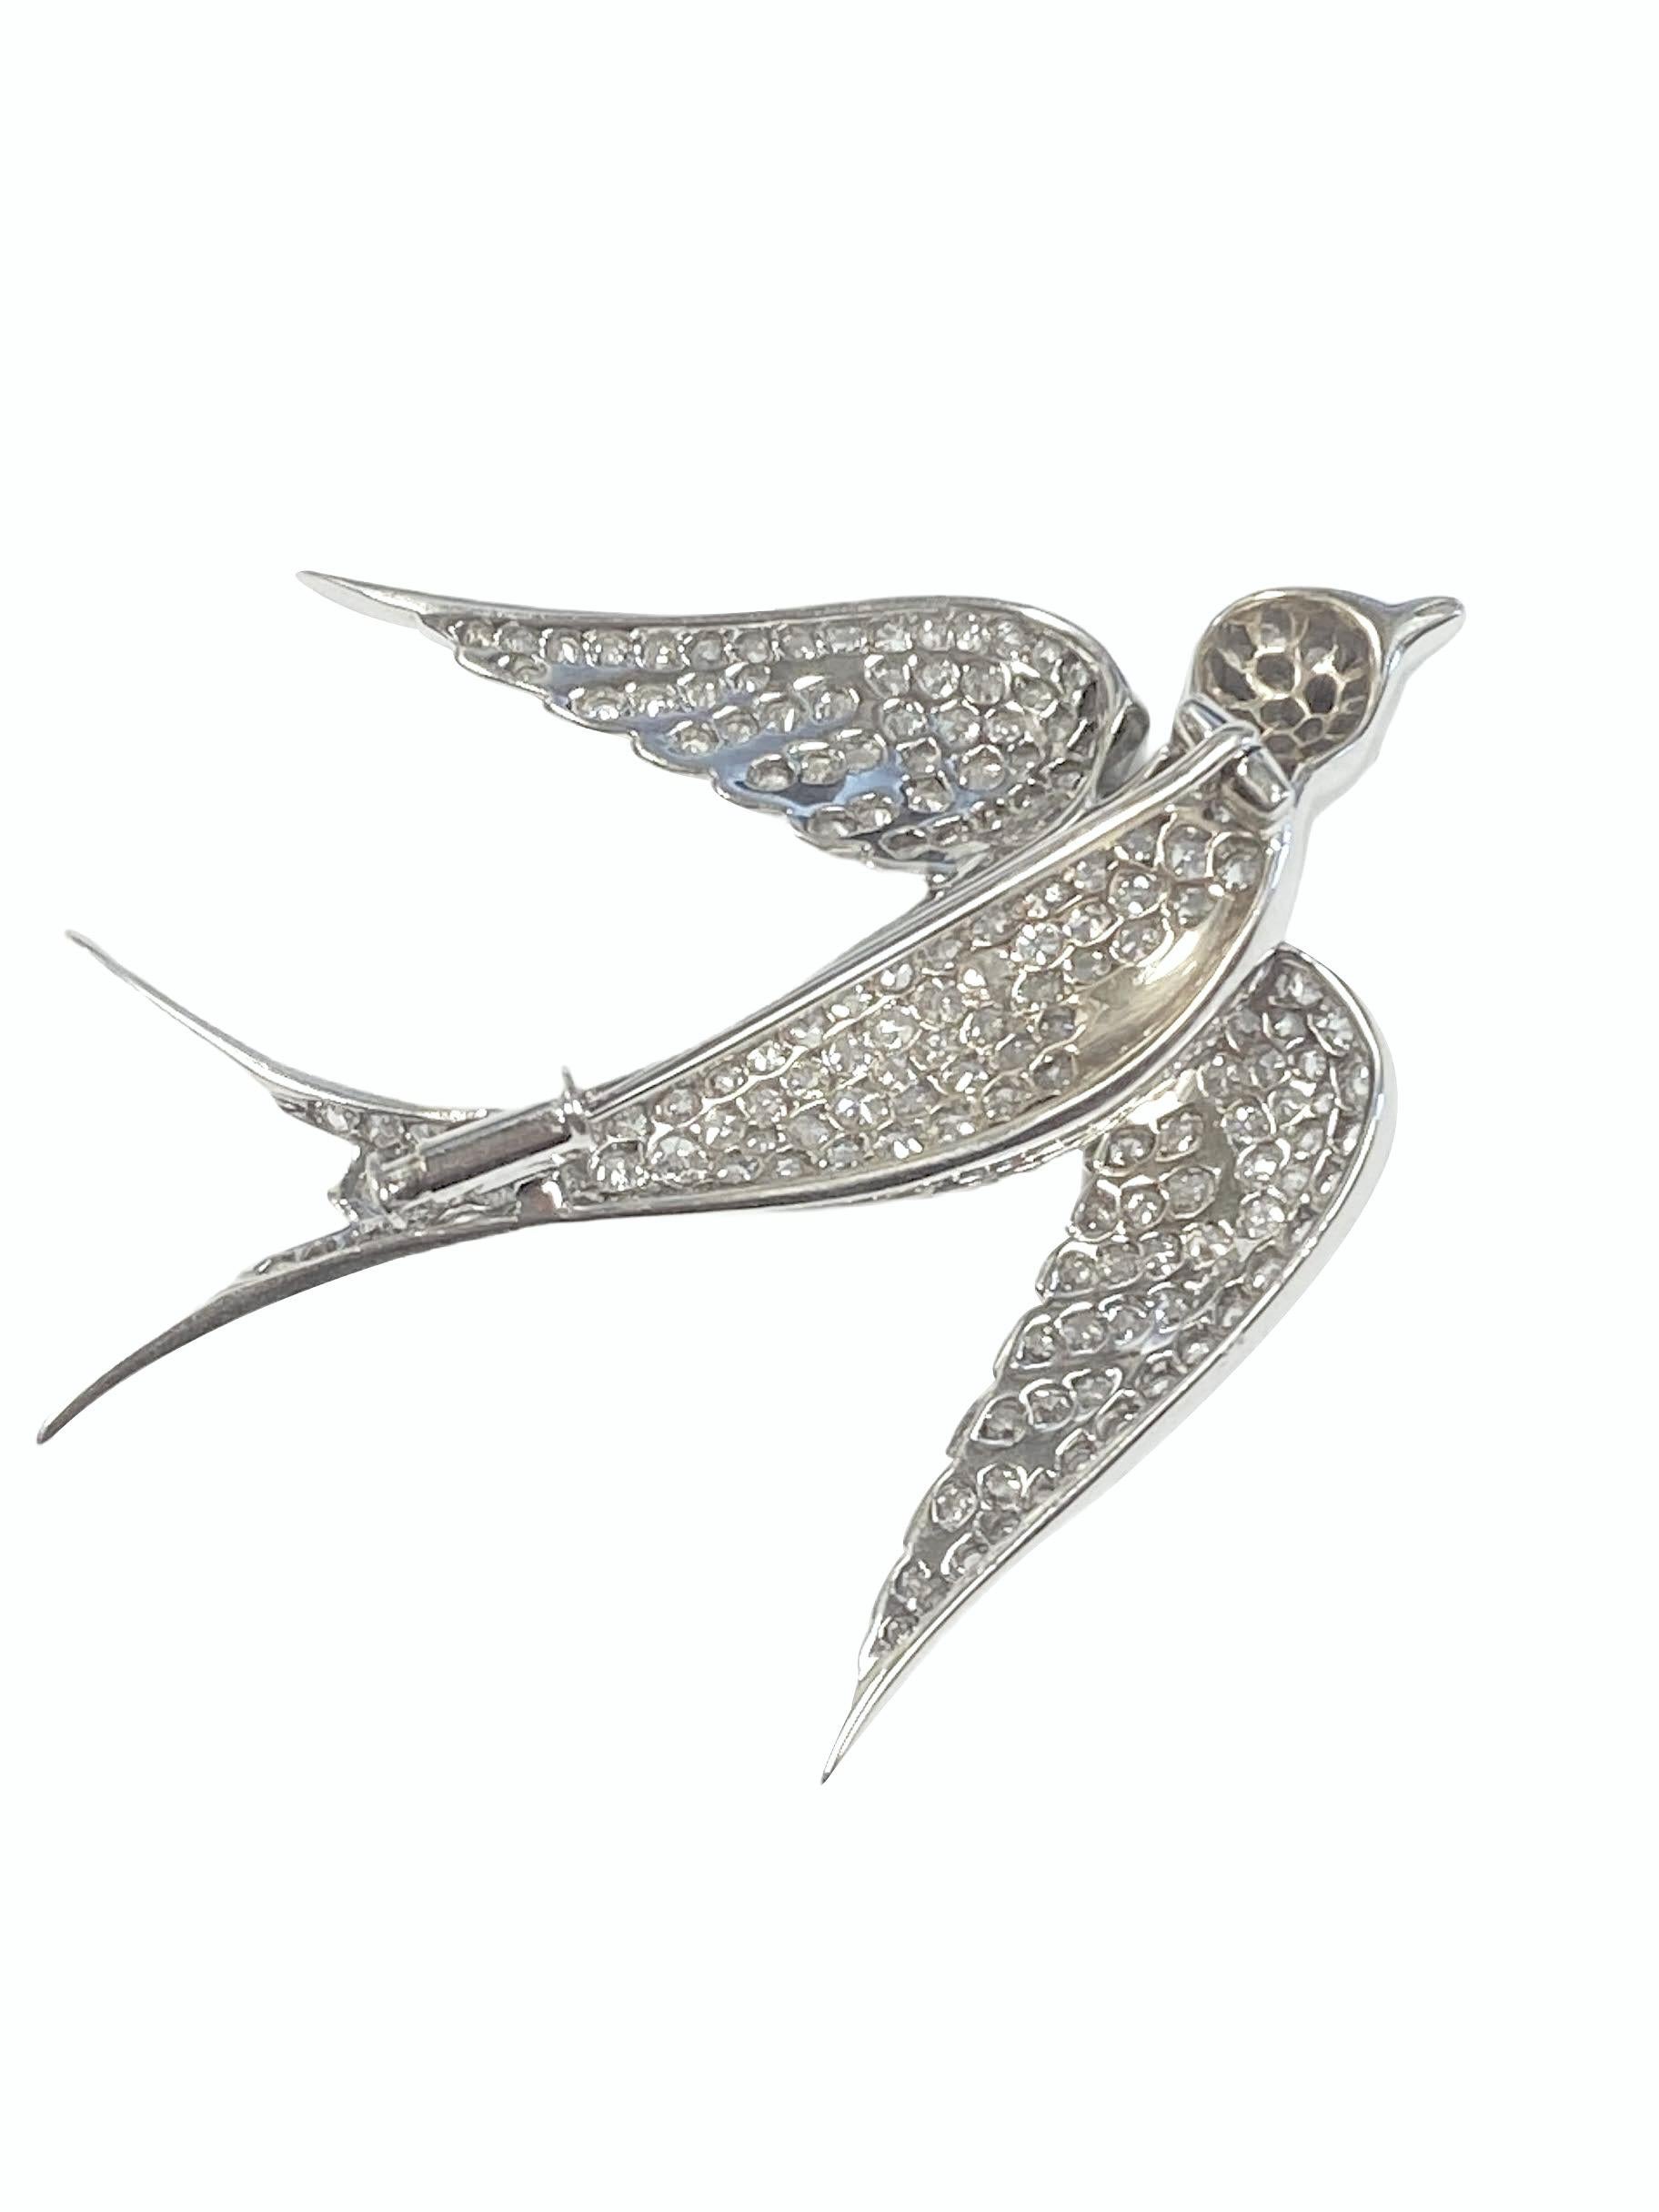 Circa 1920 Platinum Swallow Bird Brooch, measuring 2 1/2 inches in length and 2 inches from Wing tip to Tip. Set with White Clean old mine cut Diamonds totaling 5 Carats and further set with a Ruby in the Eye. Finely detailed and in excellent seldom